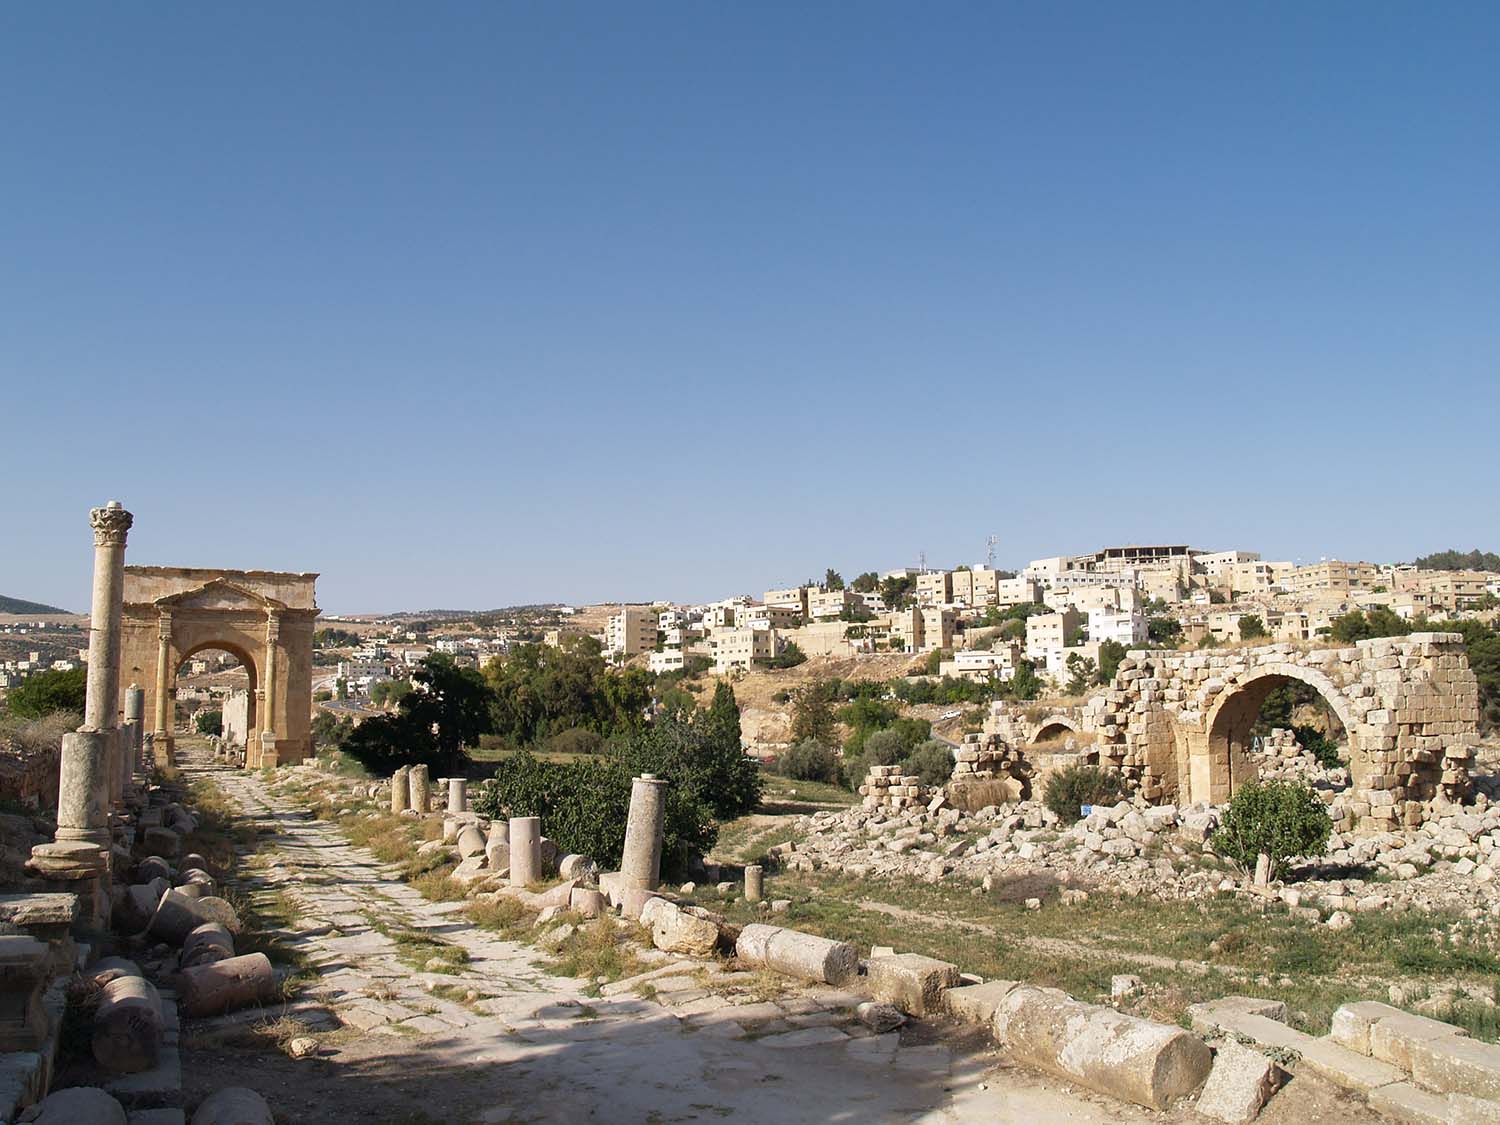 View of North Tetrapylon (left) and West Baths (right) from Cardo Maximus